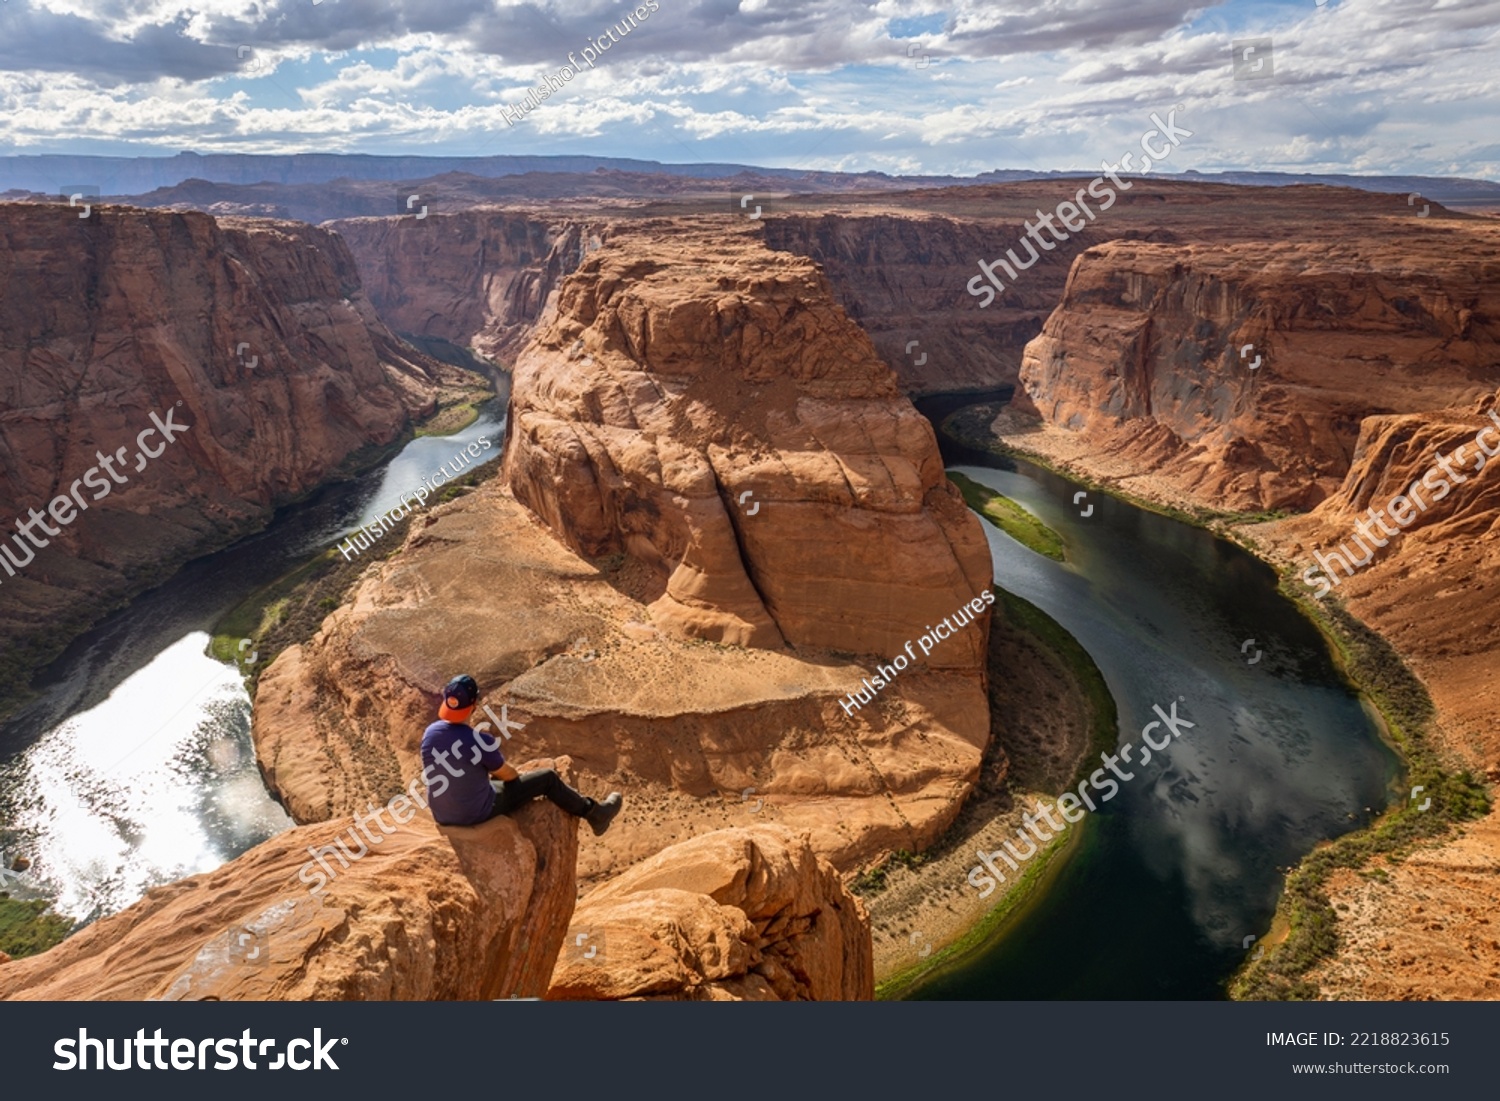 The famous horse shoe bend at Glen Canyon, with the Colorado River at the bottom surrounded by steep orange-red rocks, Arizona #2218823615